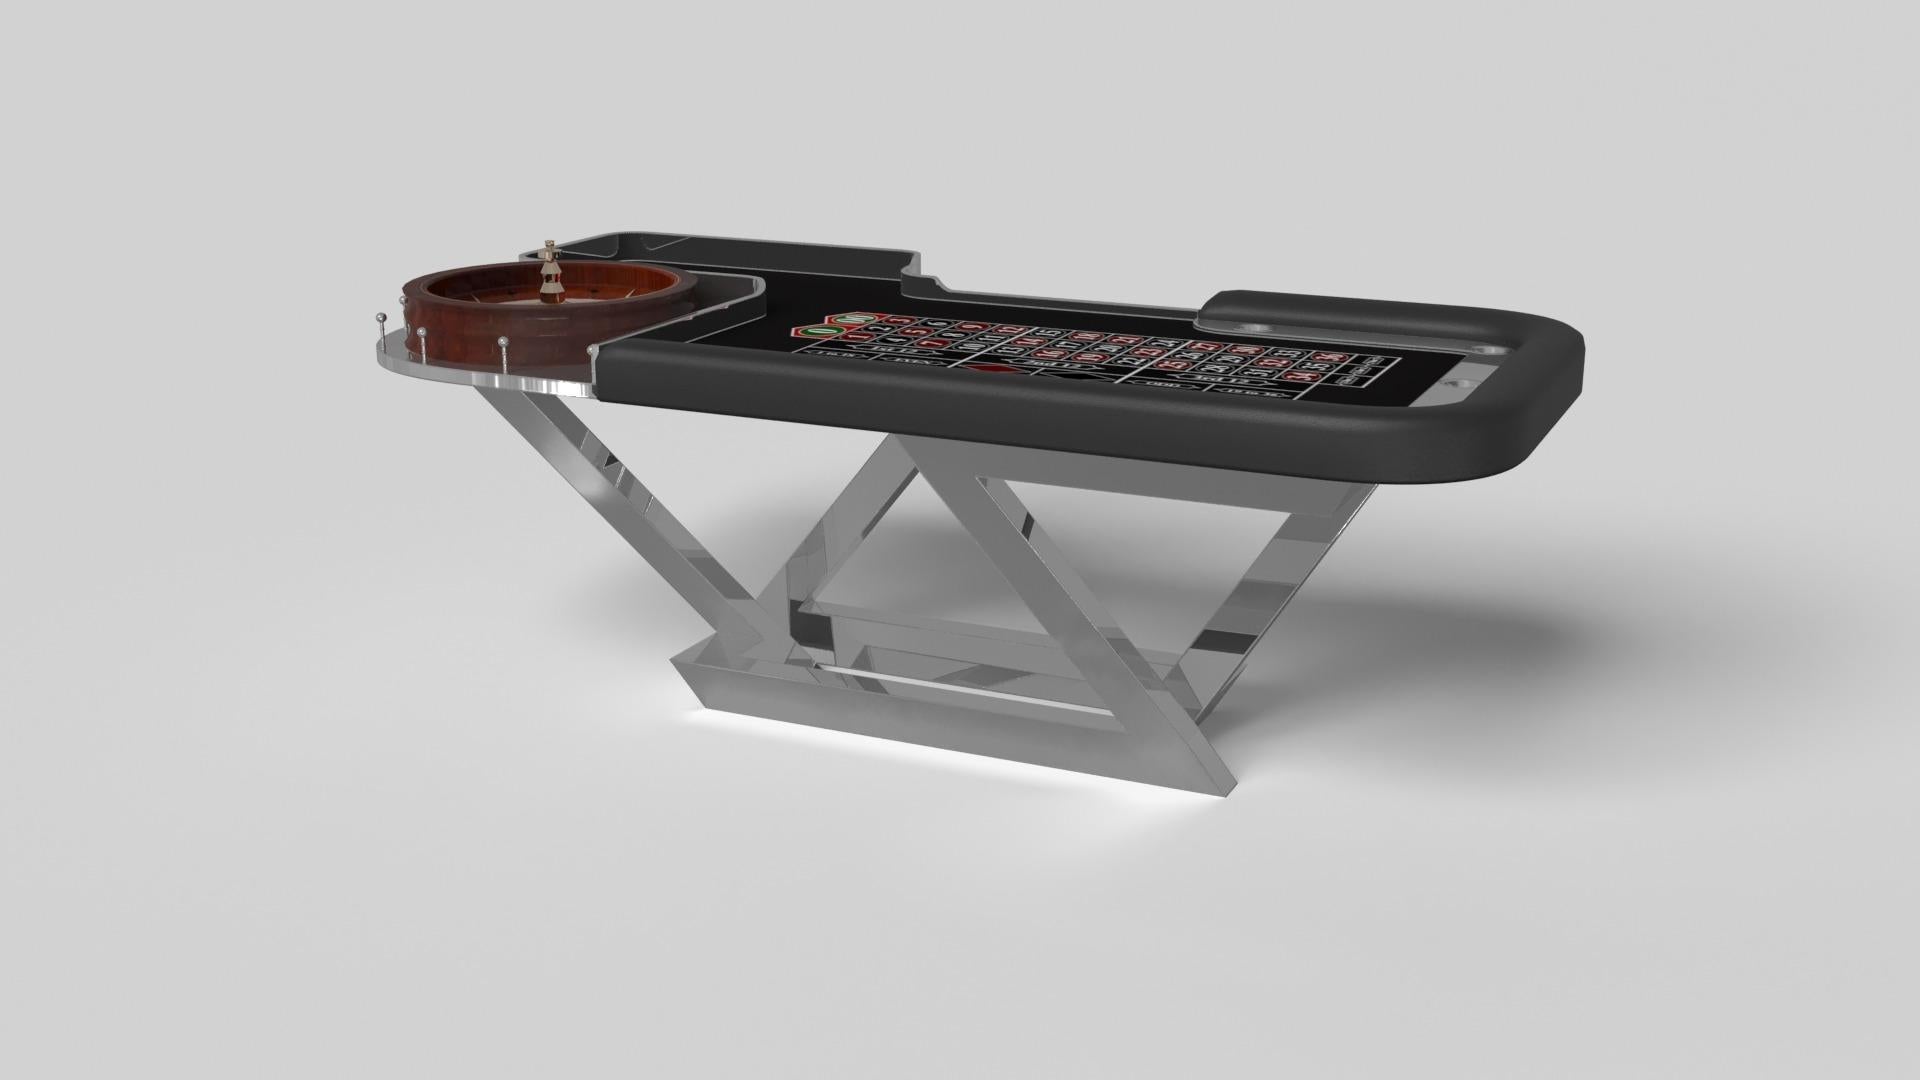 A contemporary composition of clean lines and sleek edges, the Trinity roulette table in black with red is an elegant expression of modern design. Handcrafted in a rectangular design with a classic roulette wheel and bet boxes, this table offers